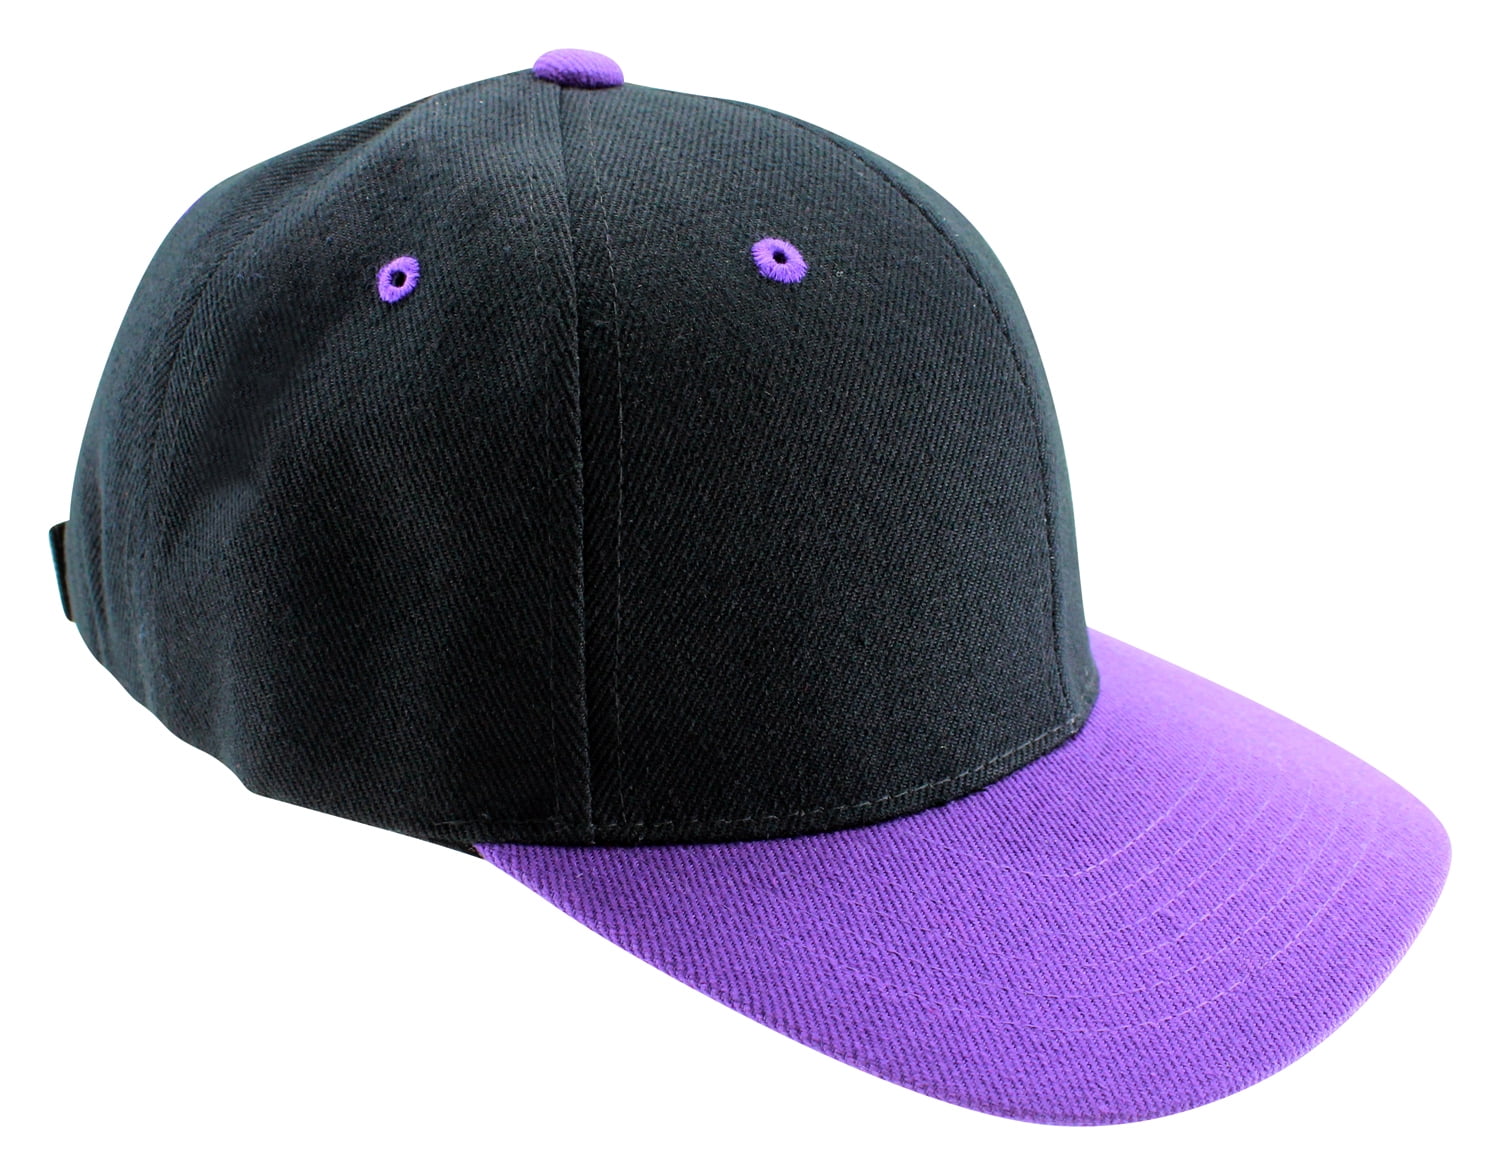 Two Tone Baseball Caps Cotton Canvas Adjustable Velcro Strap Curved